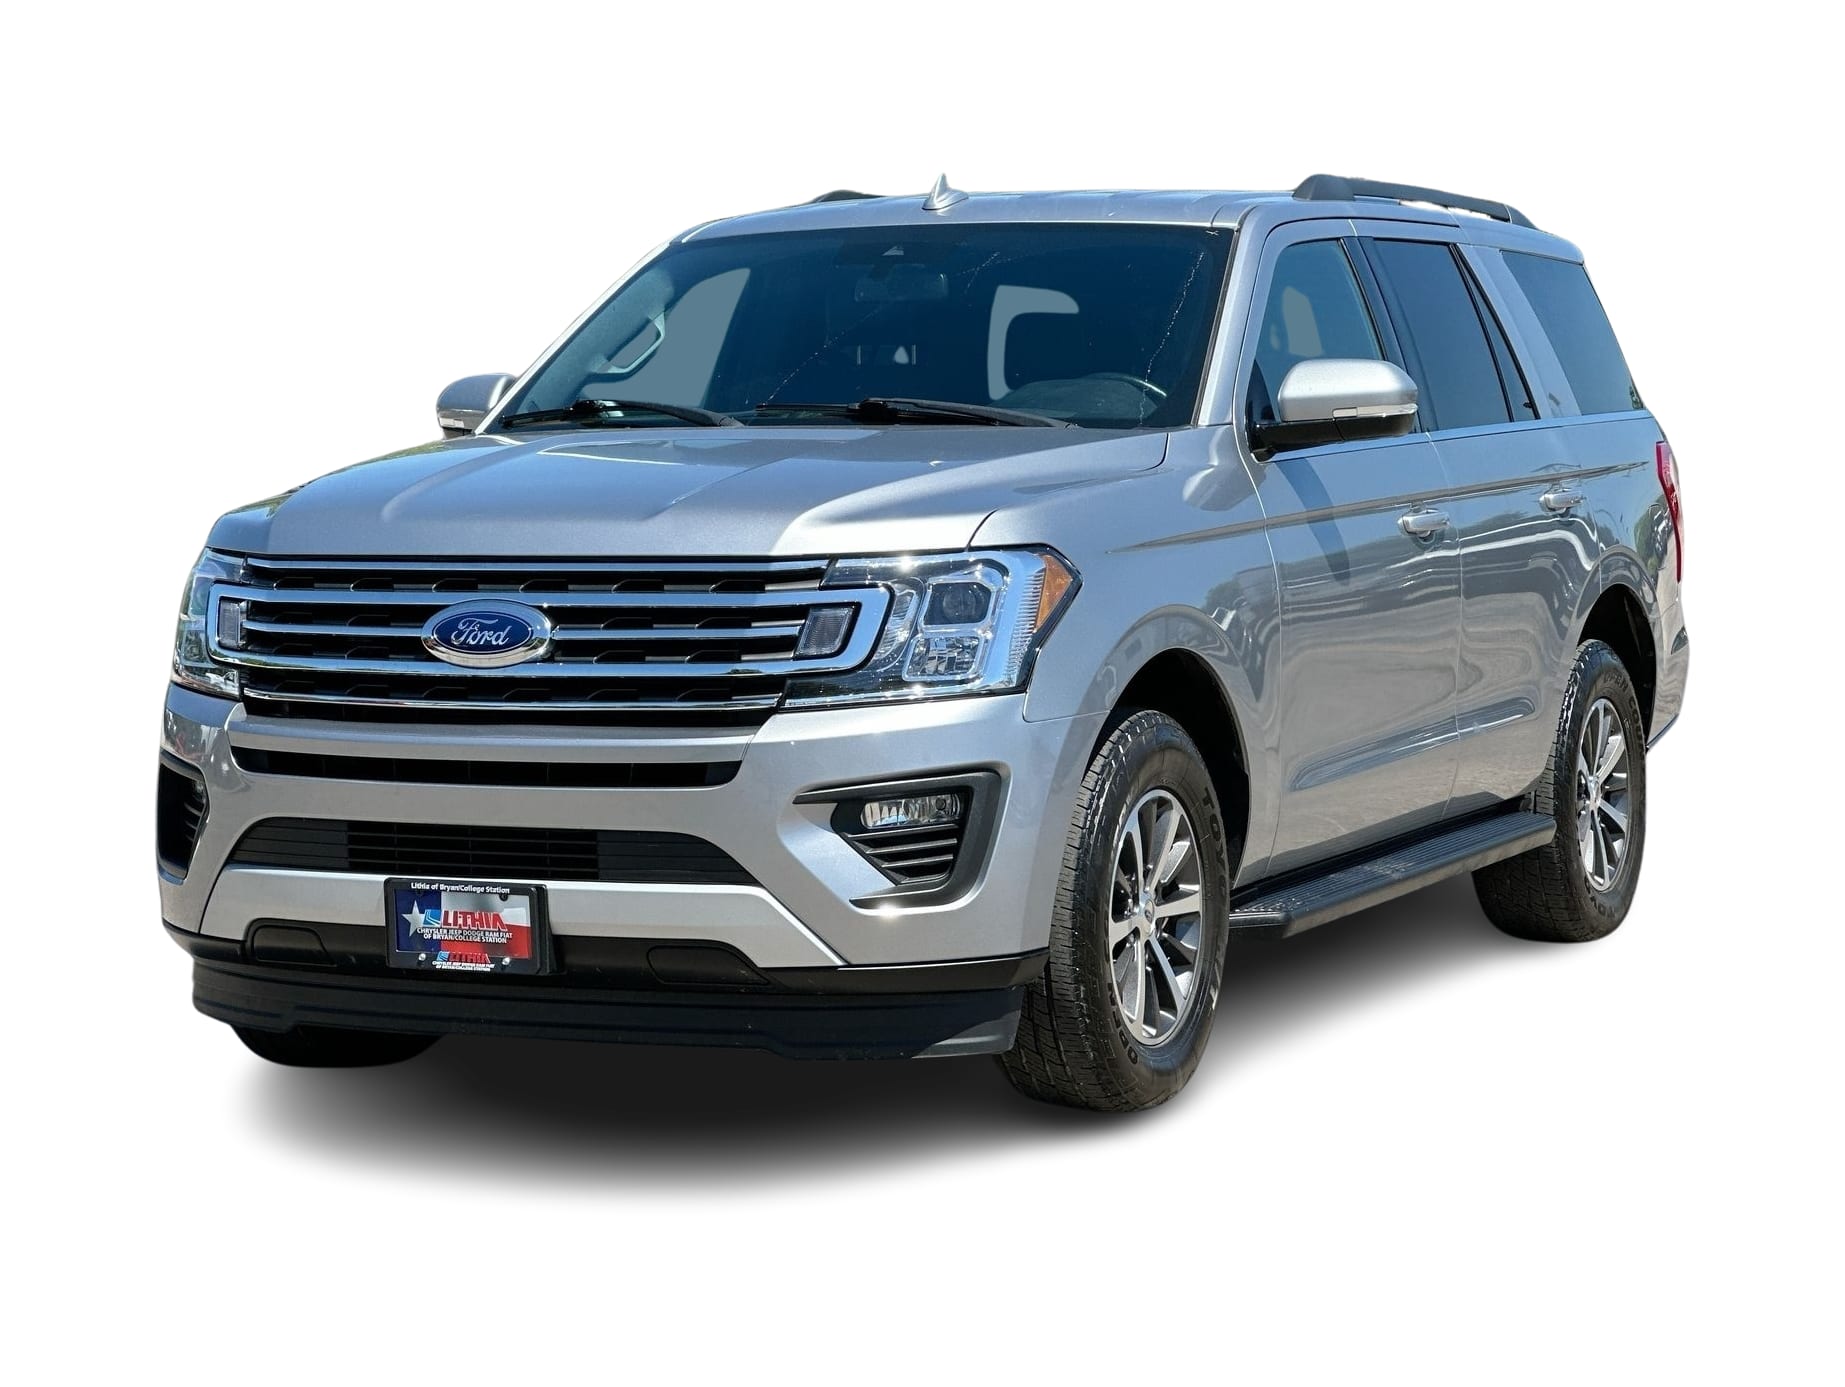 2020 Ford Expedition XLT Hero Image